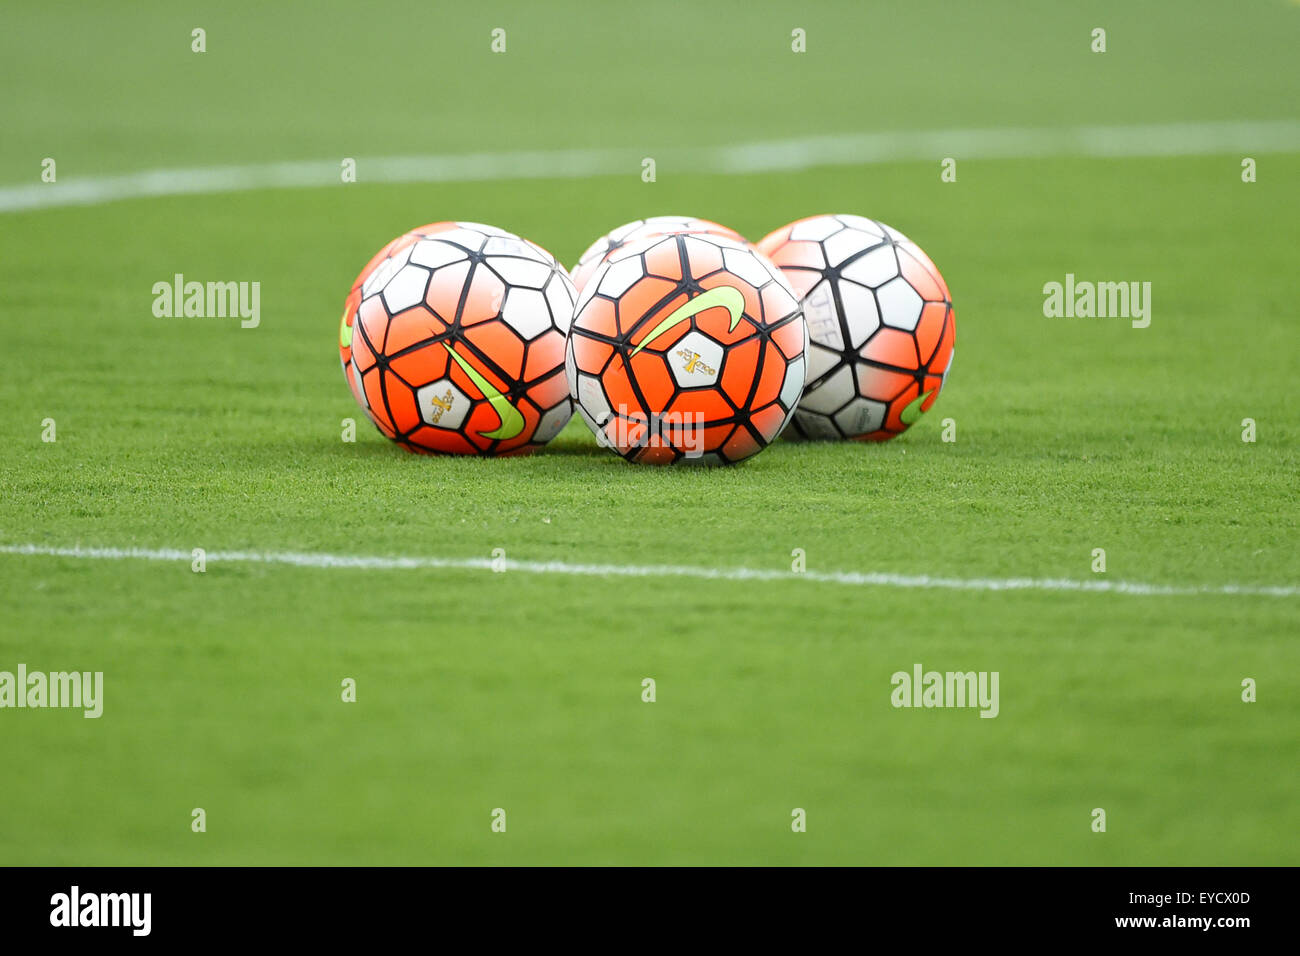 Philadelphia, Pennsylvania, USA. 26th July, 2015. Soccer balls sit on the pitch prior to the start of the 2015 CONCACAF Gold Cup final between Jamaica and Mexico at Lincoln Financial Field in Philadelphia, Pennsylvania. Mexico defeated Jamaica 3-1. Rich Barnes/CSM/Alamy Live News Stock Photo